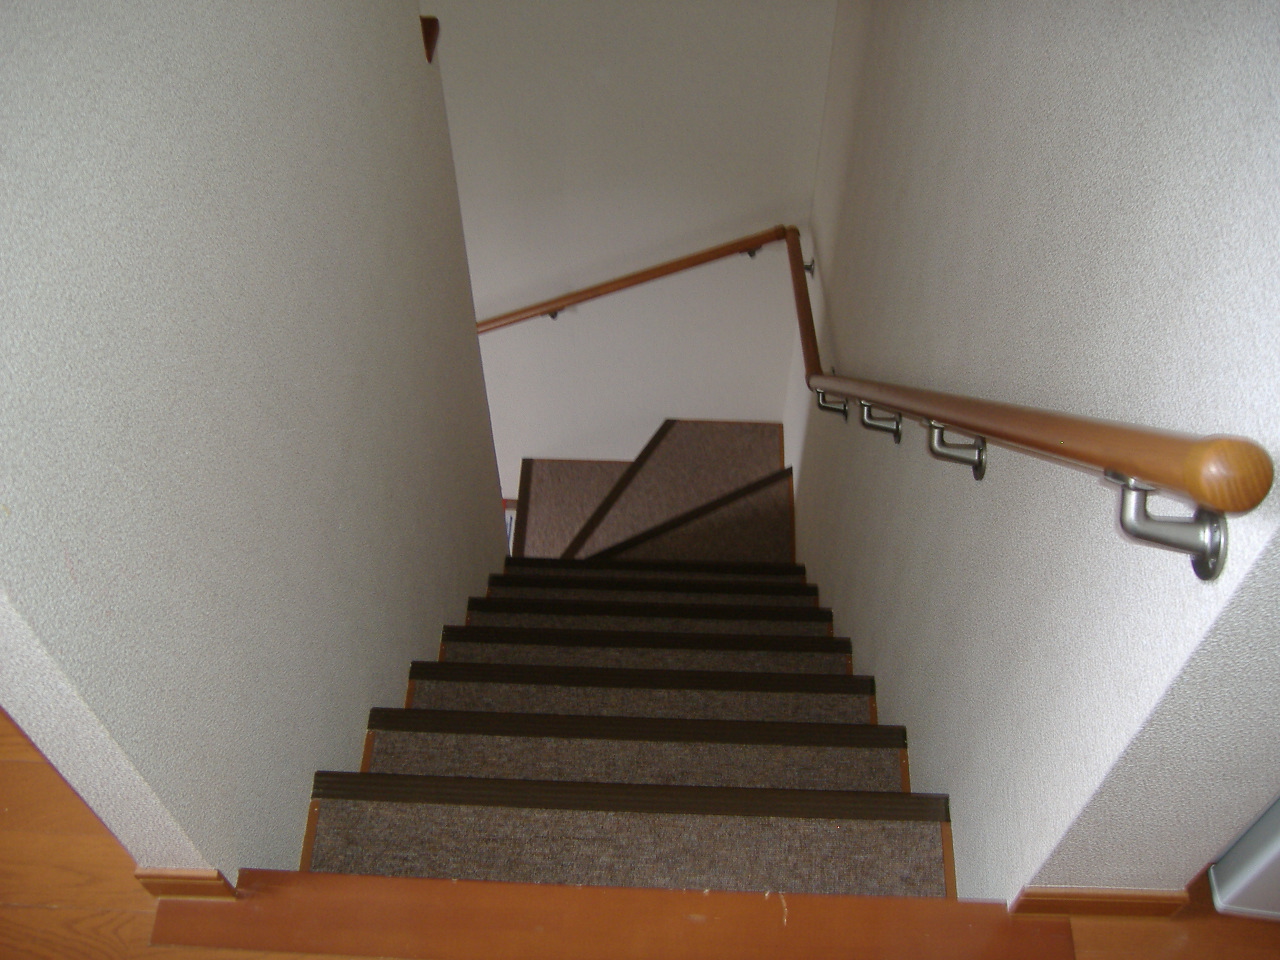 Other room space. To the entrance down the stairs